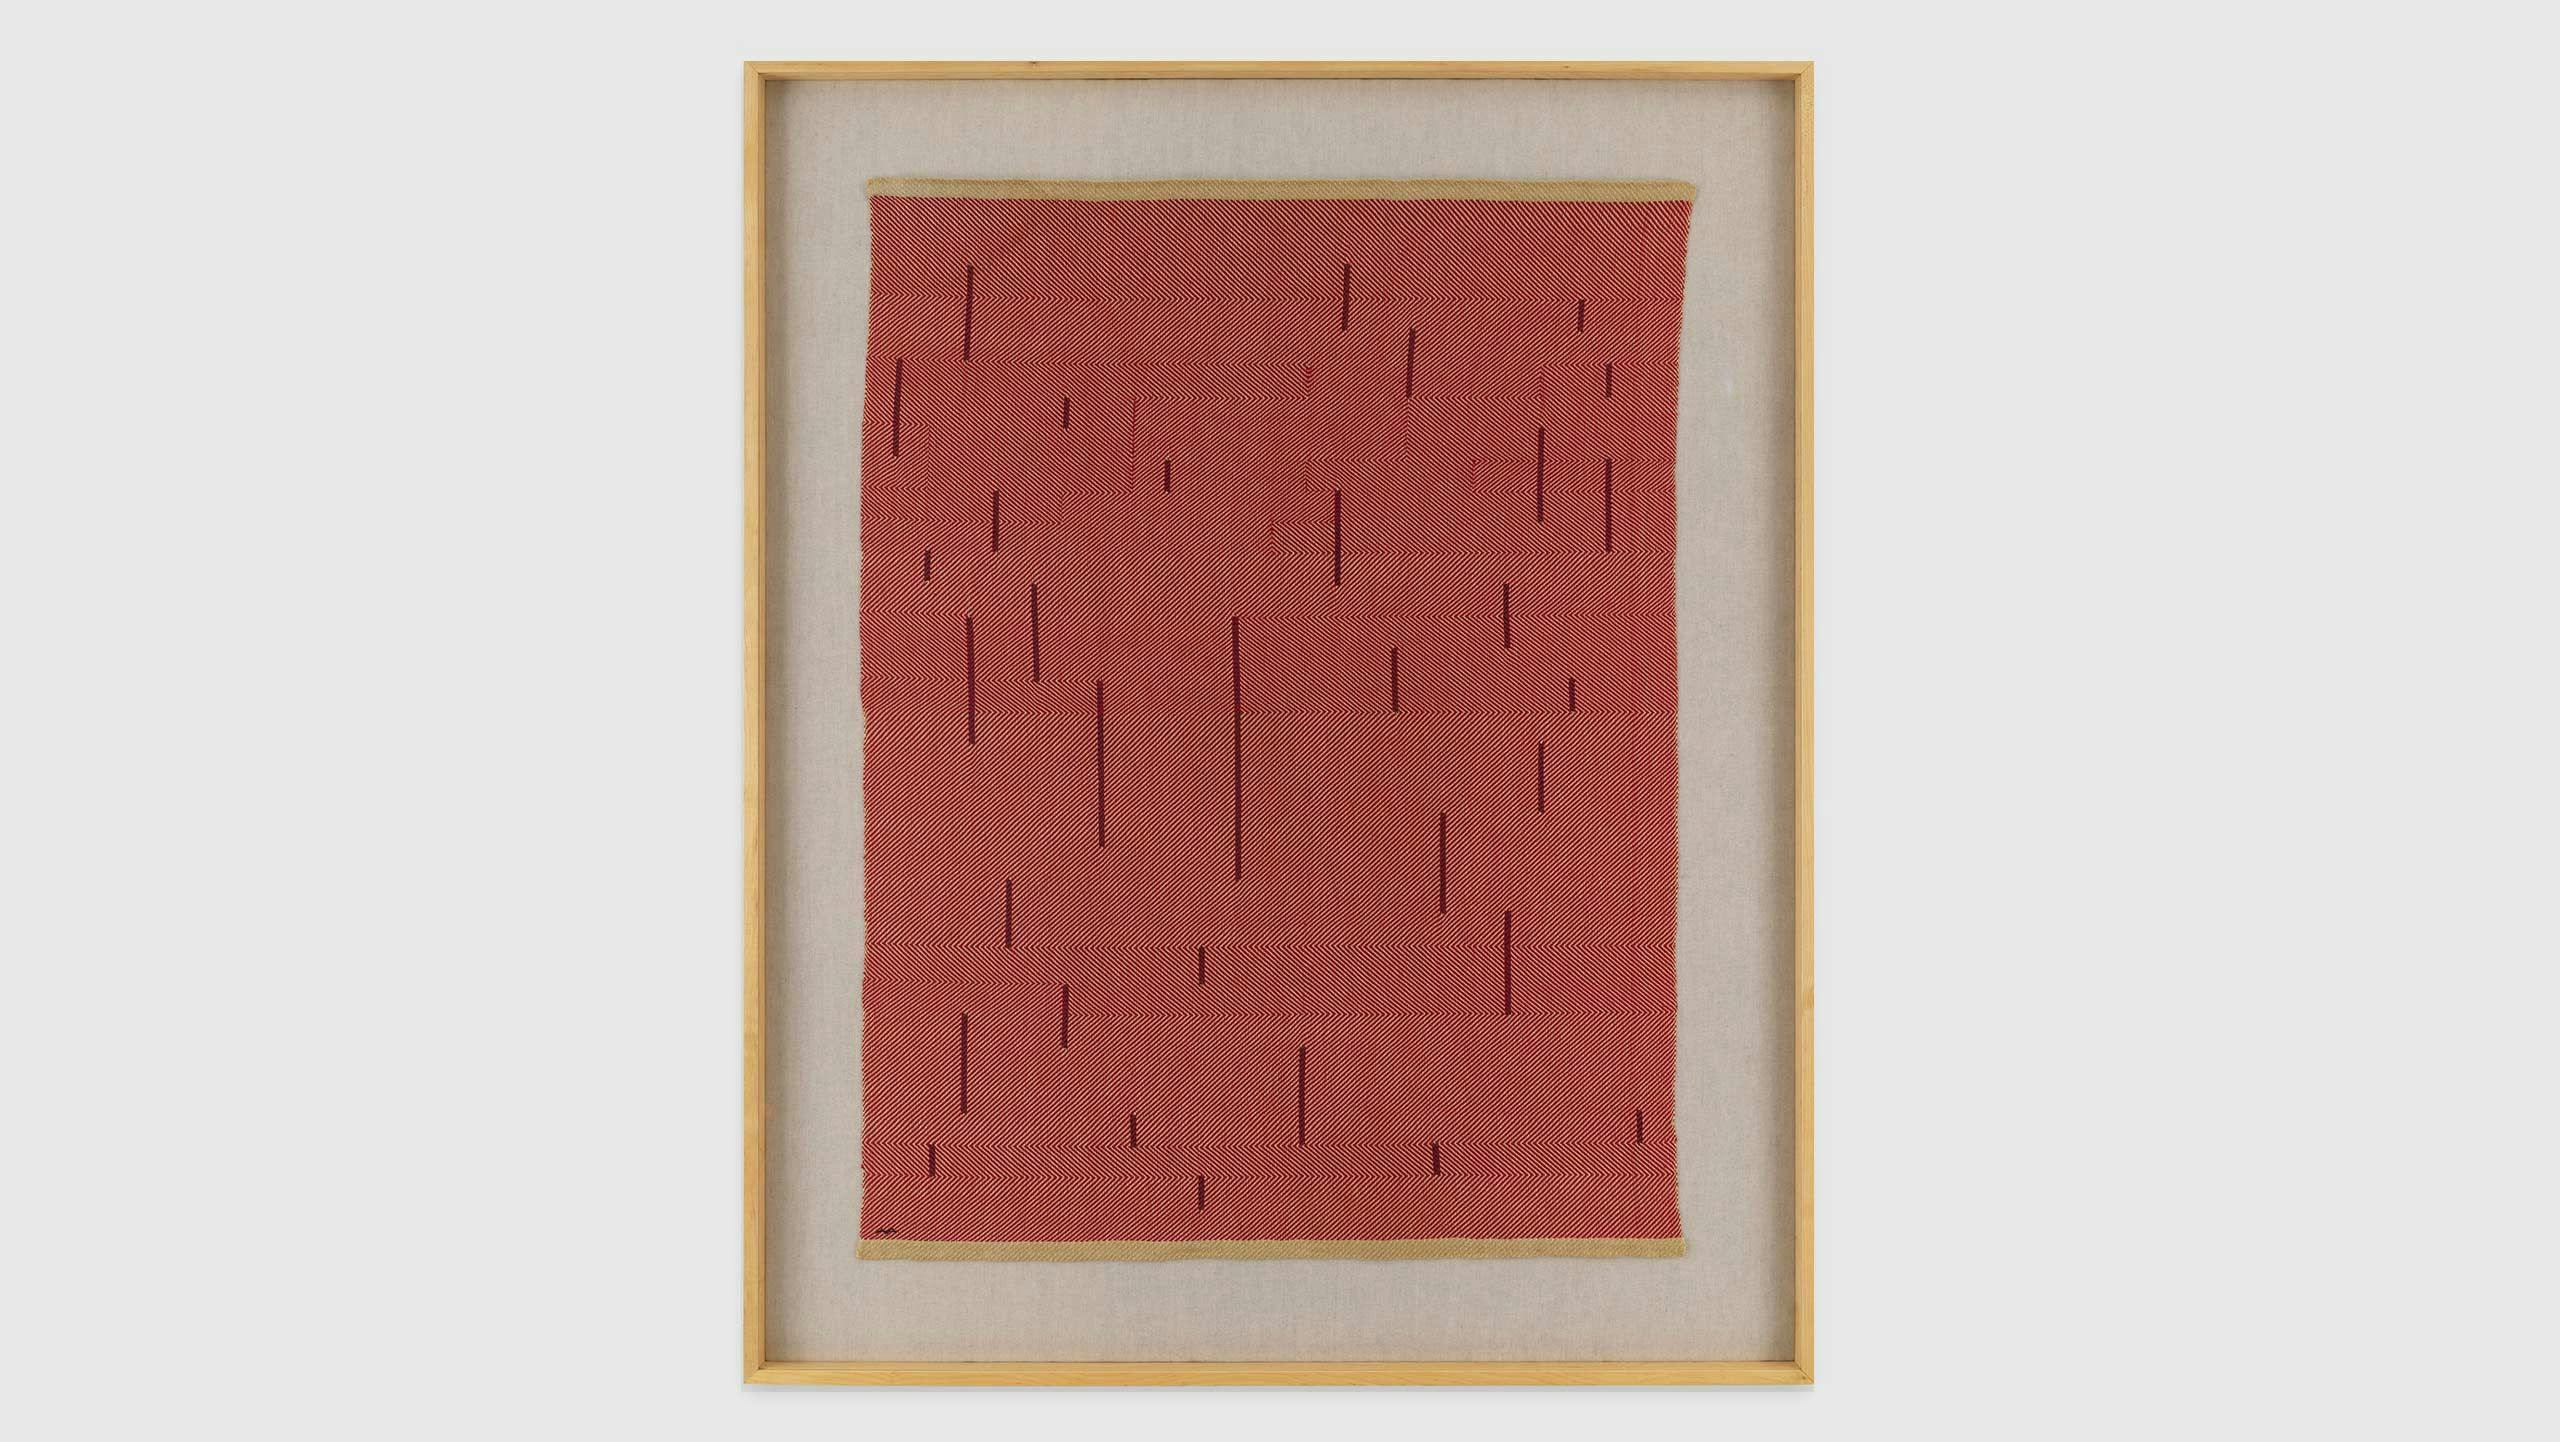 A cotton and linen weaving by Anni Albers, titled With Verticals, dated 1946.